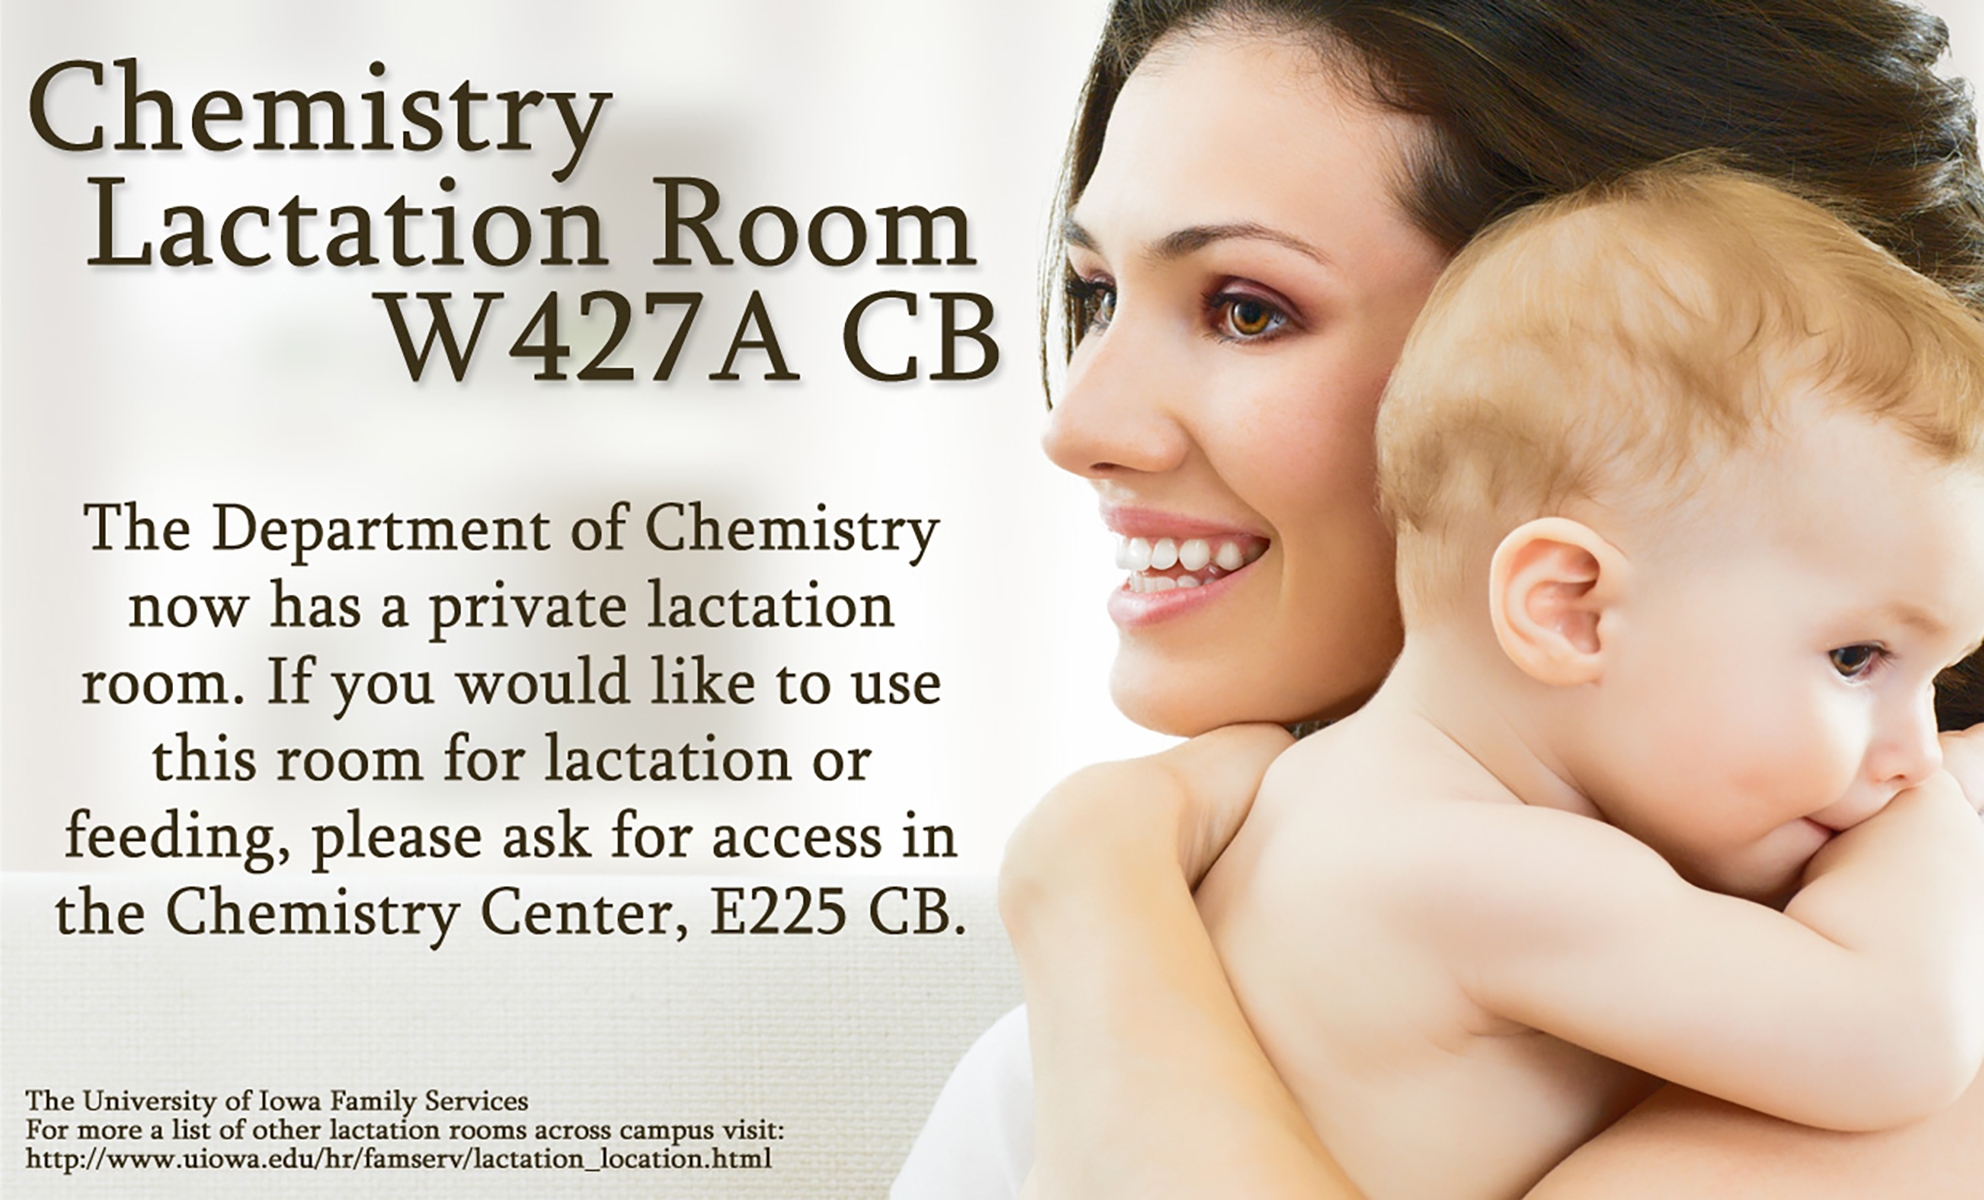 Chemistry Lactation Room is located in W427A CB. The Department of Chemistry now has a private lactation room. If you would like to use this room for lactation or feeding, please ask for access in the Chemistry Center, E225 CB.